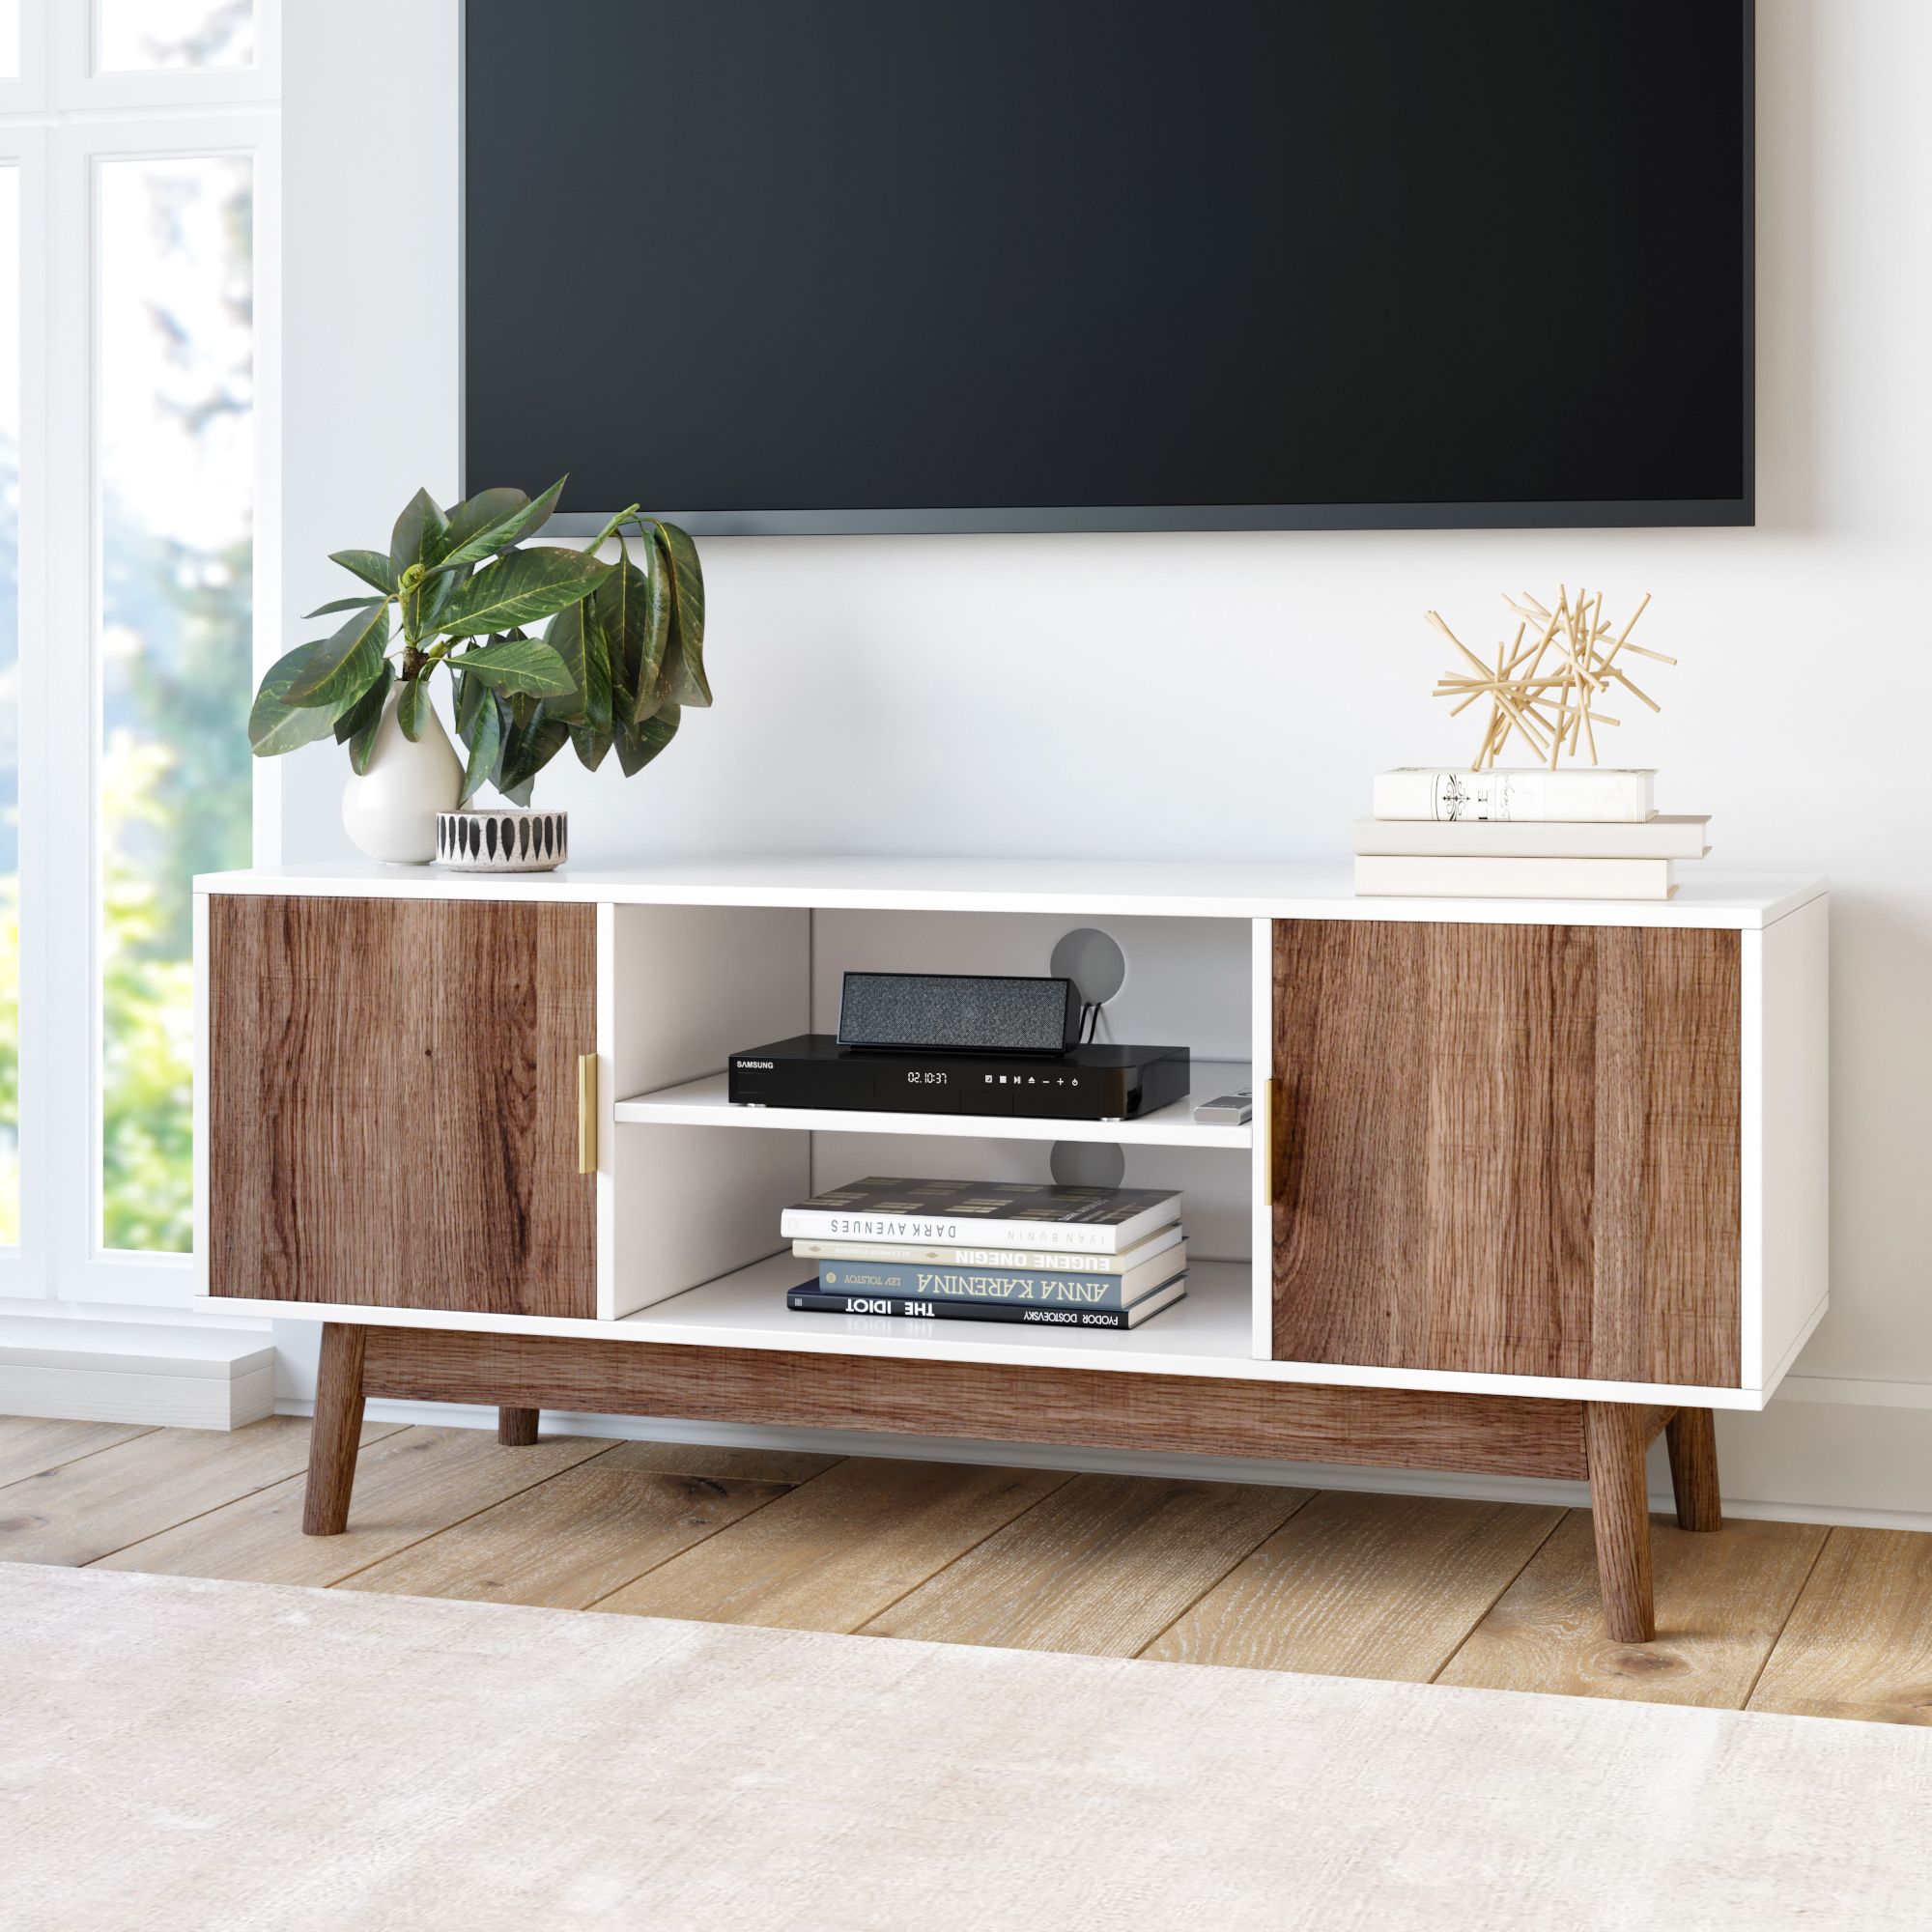 Nathan James Wesley Scandinavian Tv Stand Media Console Pertaining To Oak Tv Stands With Glass Doors (View 13 of 15)